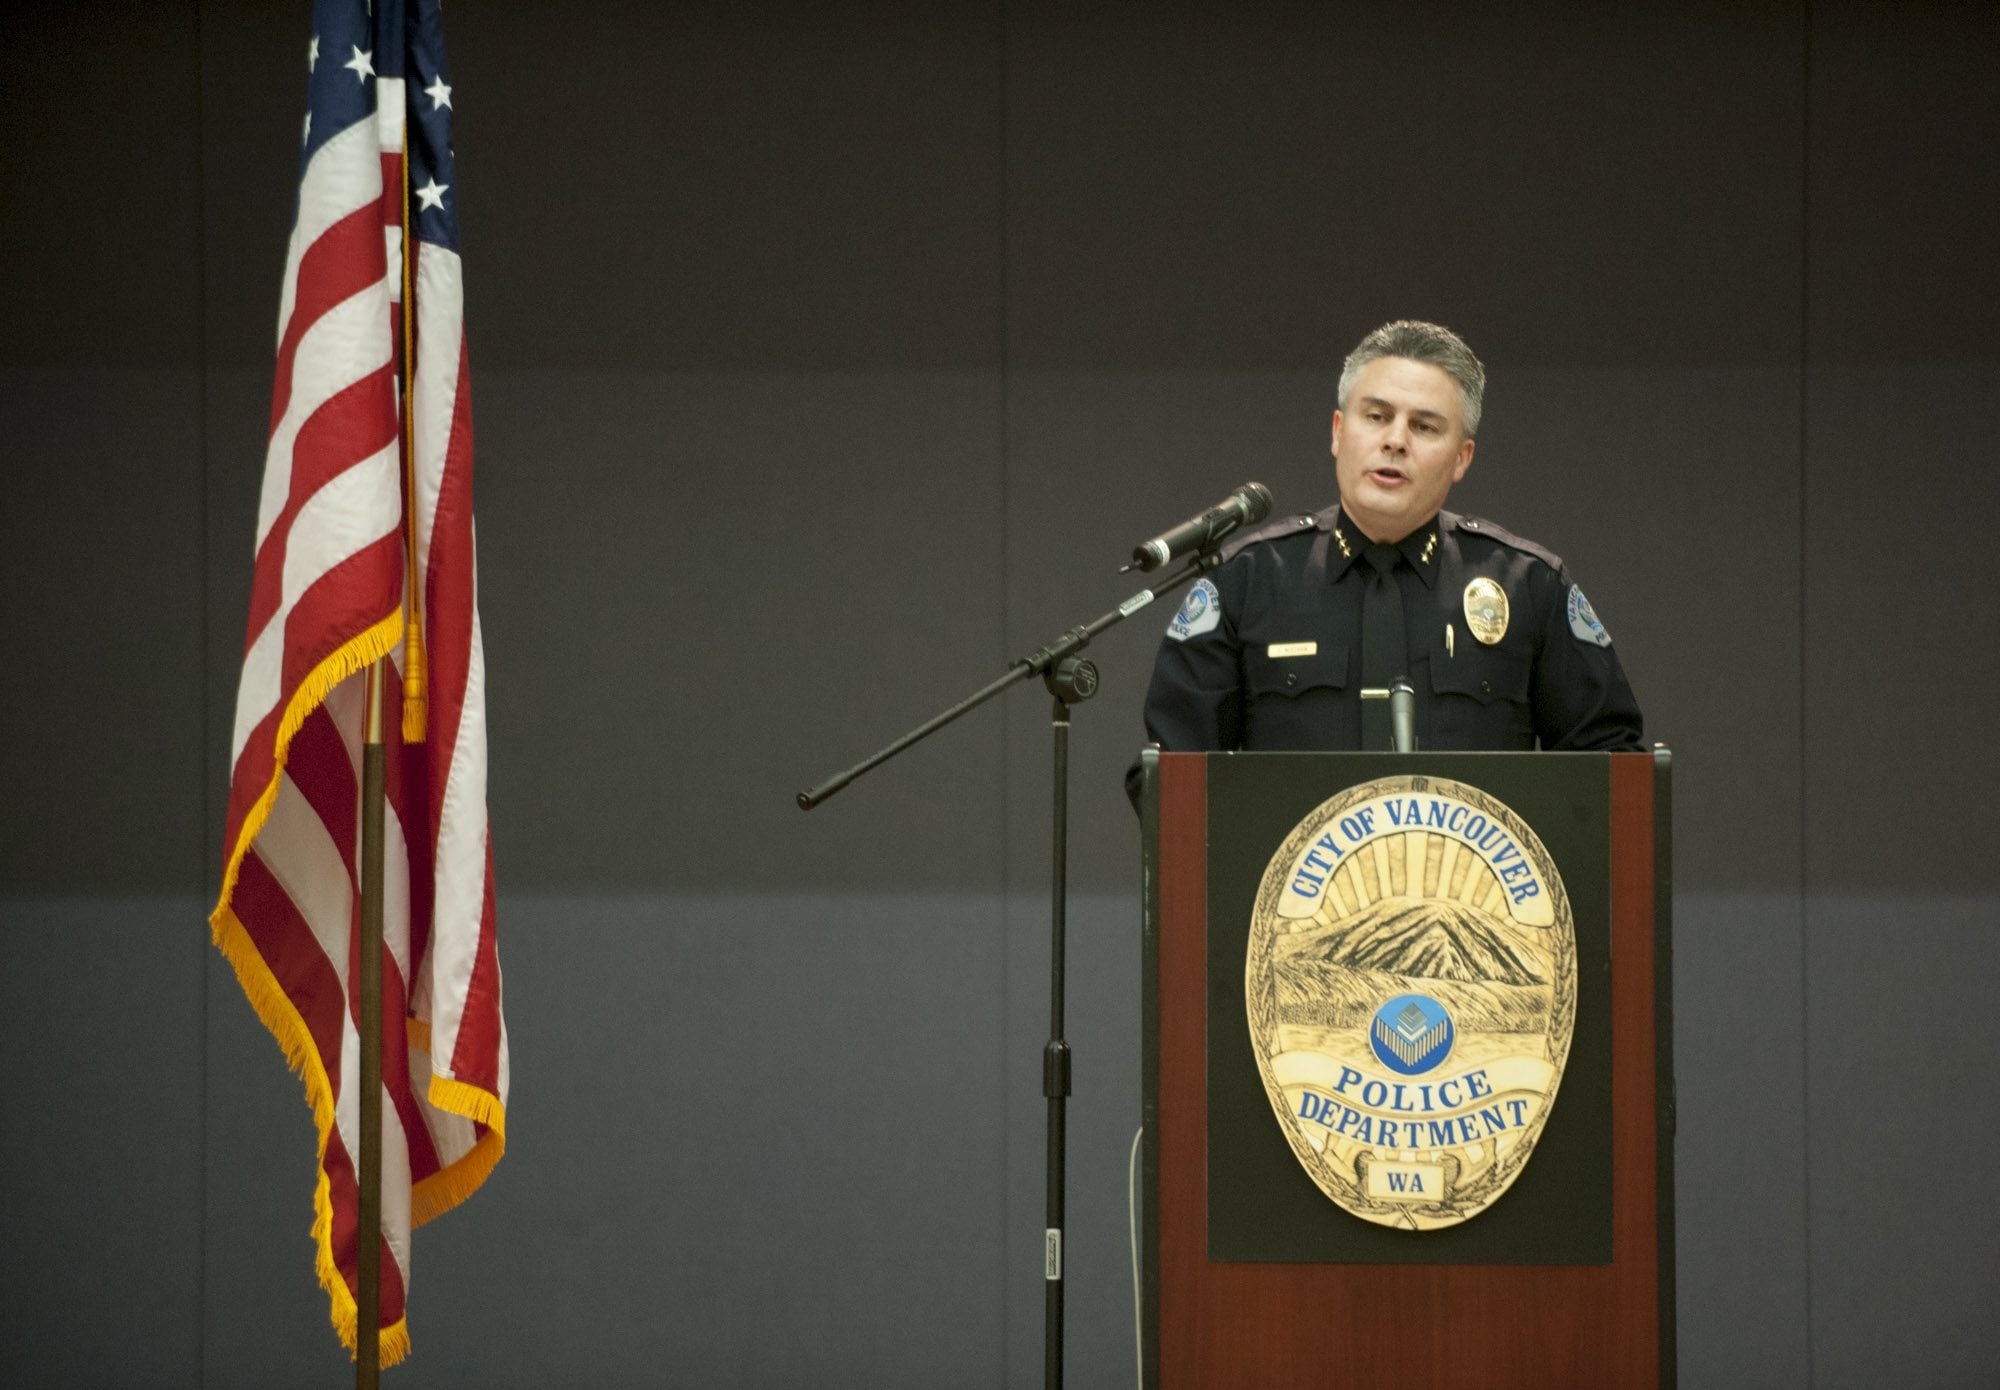 Vancouver Police Department Chief James McElvain speaks at the department's annual recognition and awards ceremony in March.